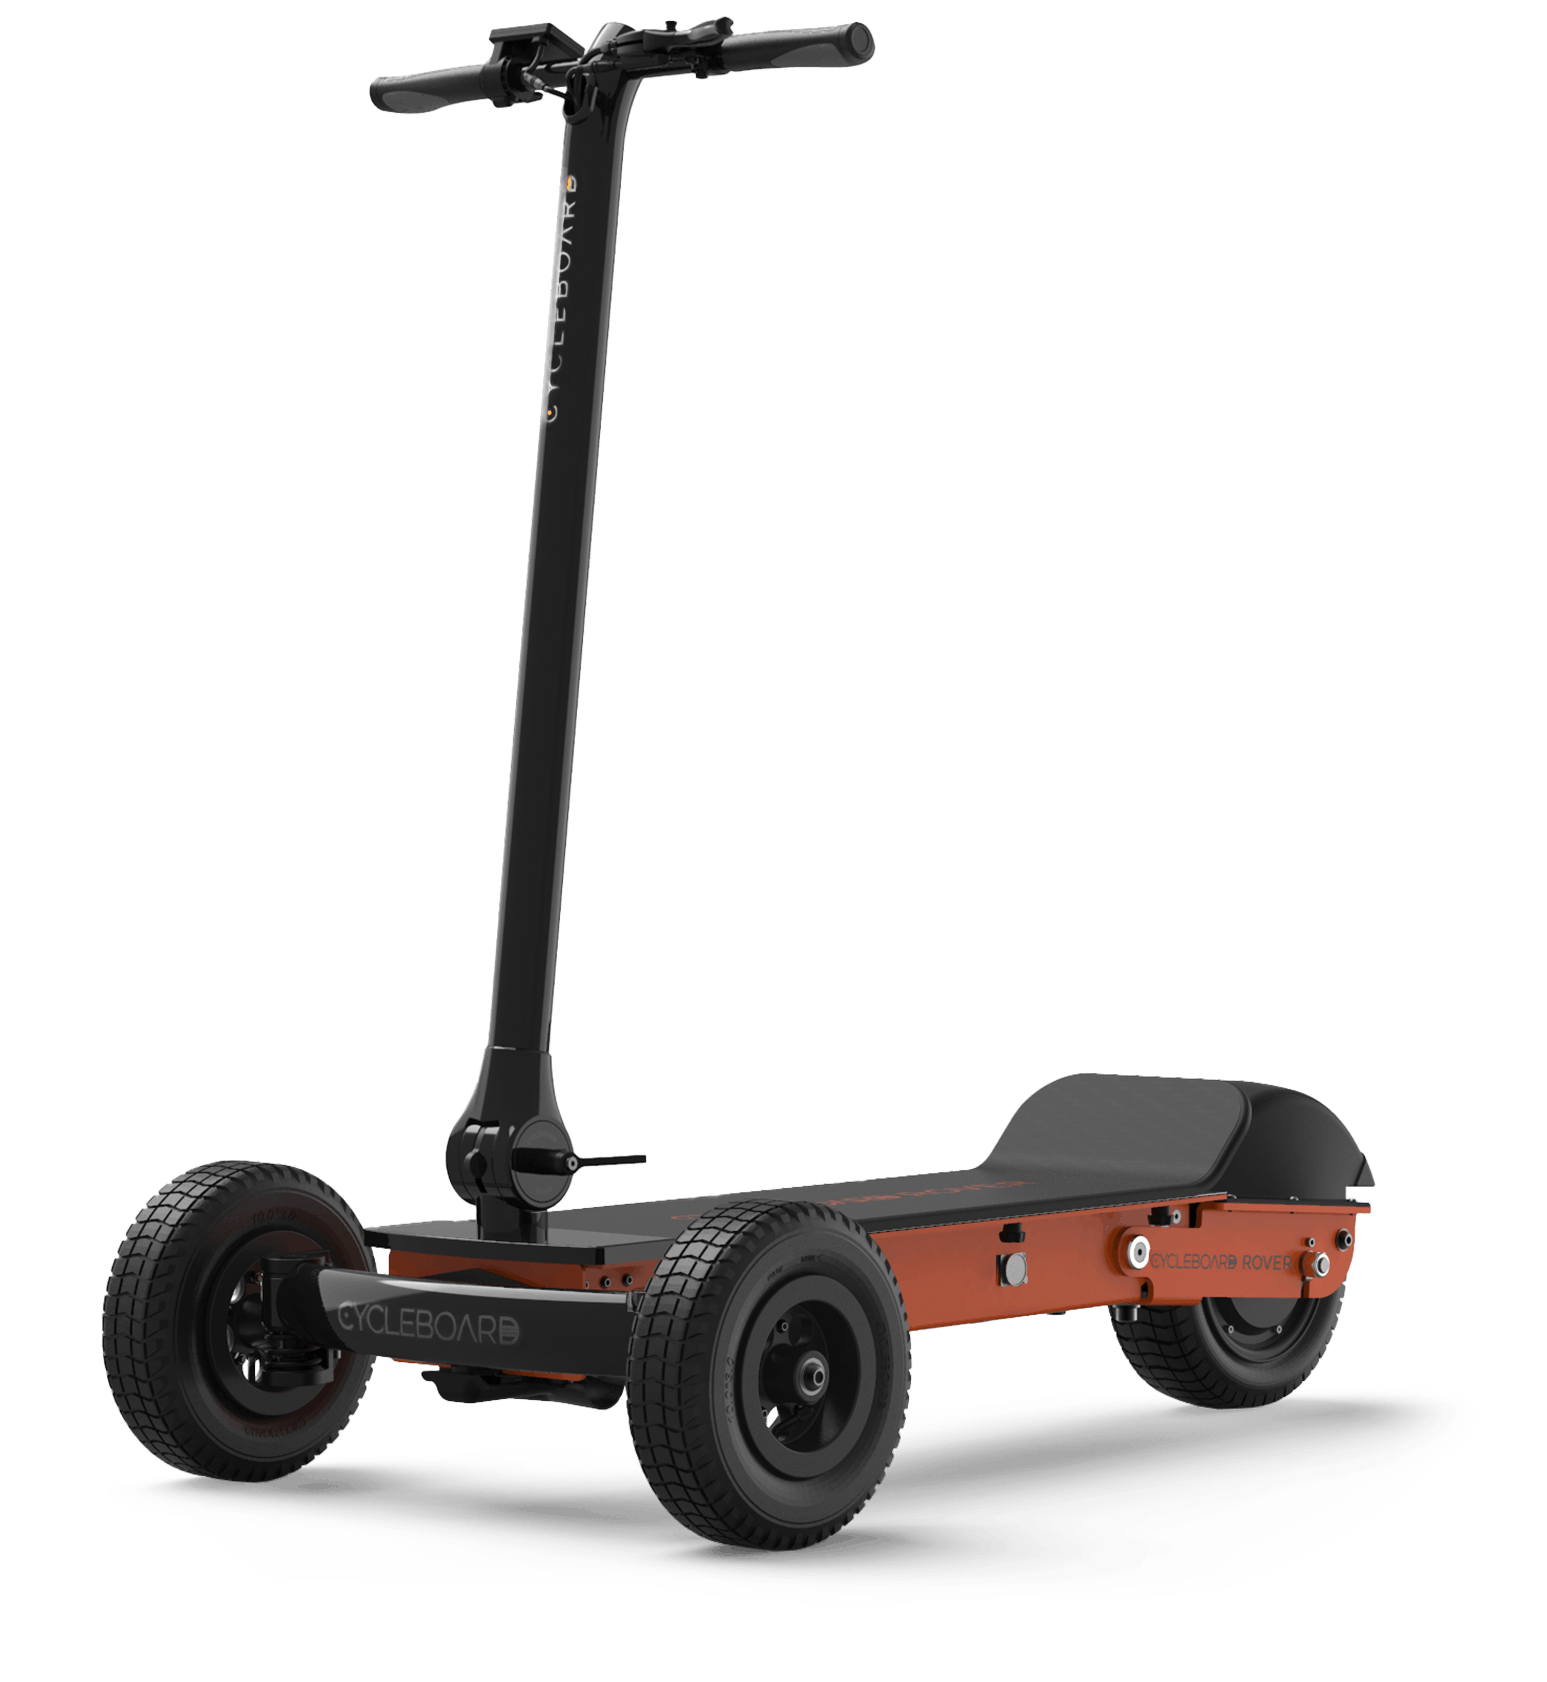 Cycleboard Rover  All-terrain 3 wheeled Electric Vehicle